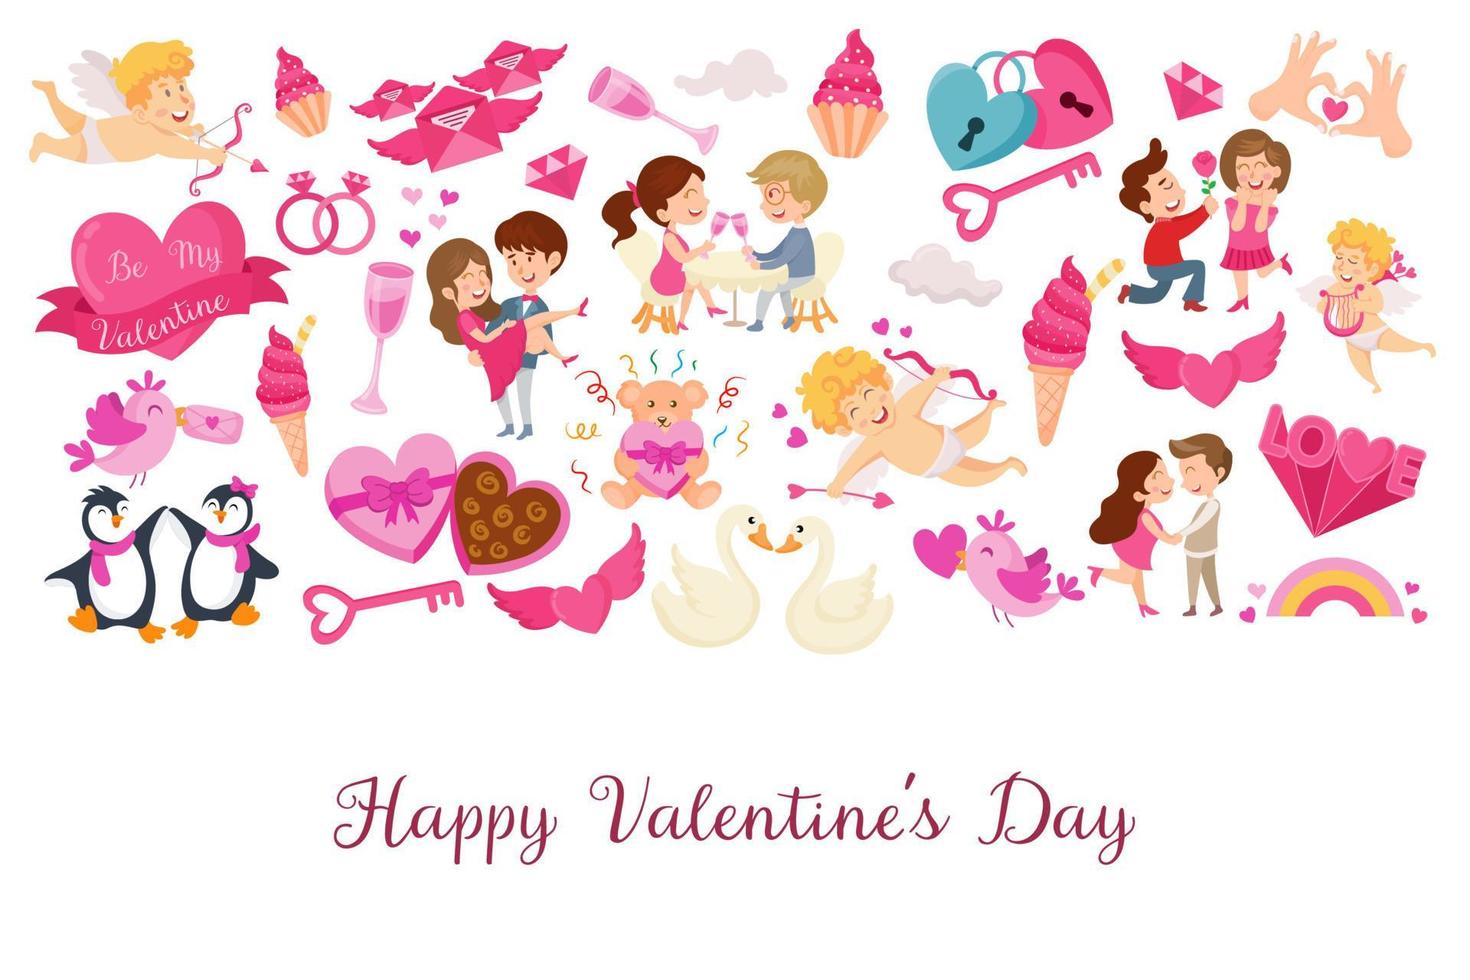 Valentine's Day greeting card. Background template for Valentine's Day celebration vector